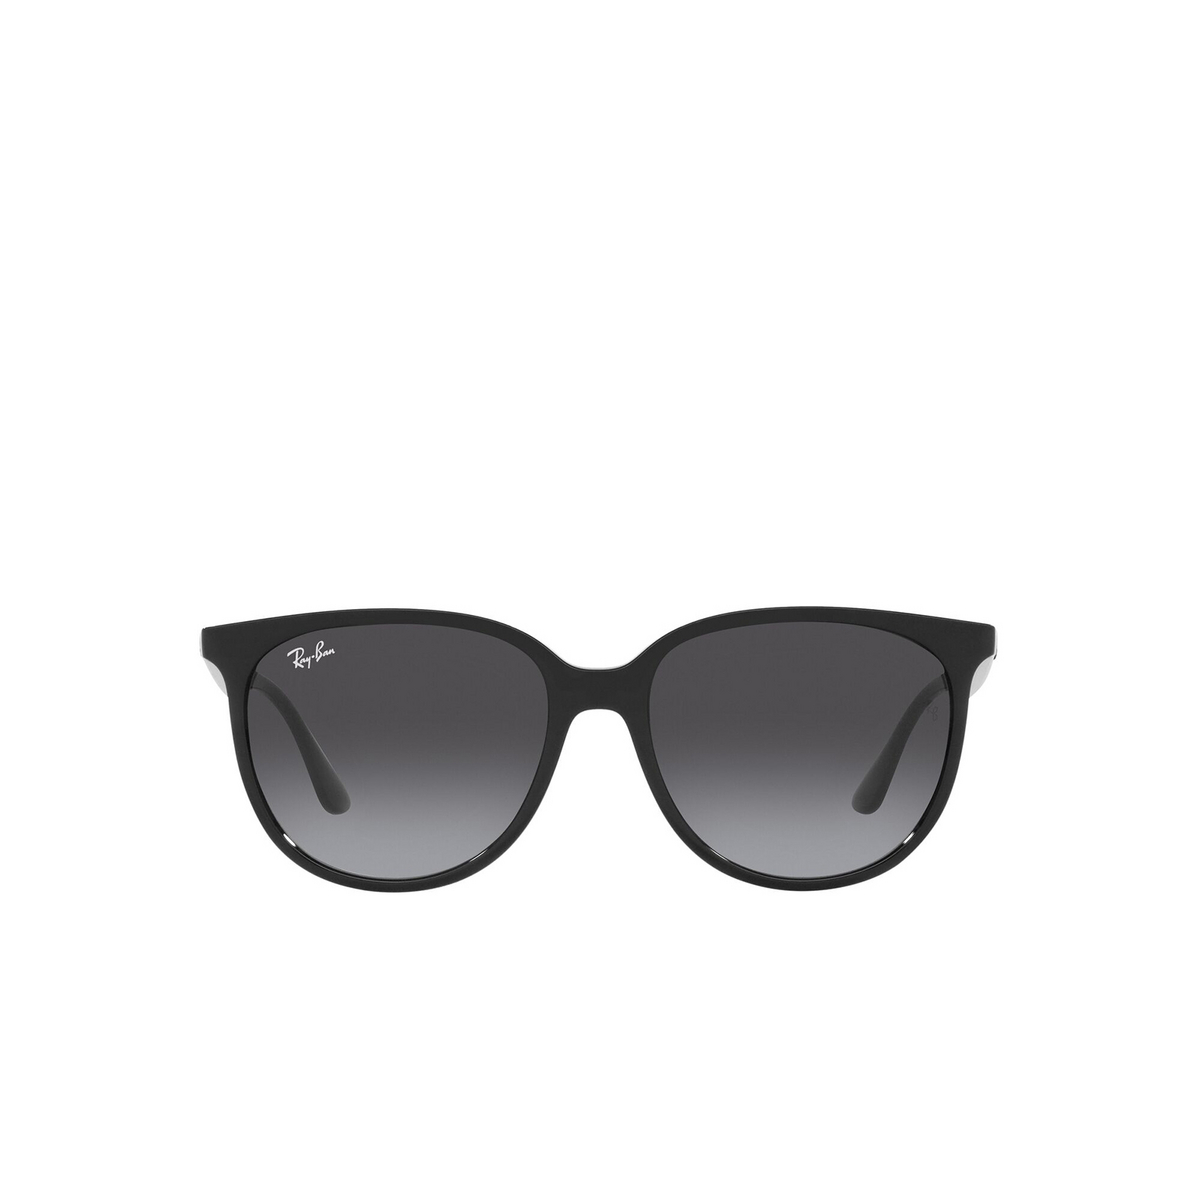 Ray-Ban® Square Sunglasses: RB4378 color Black 601/8G - front view.